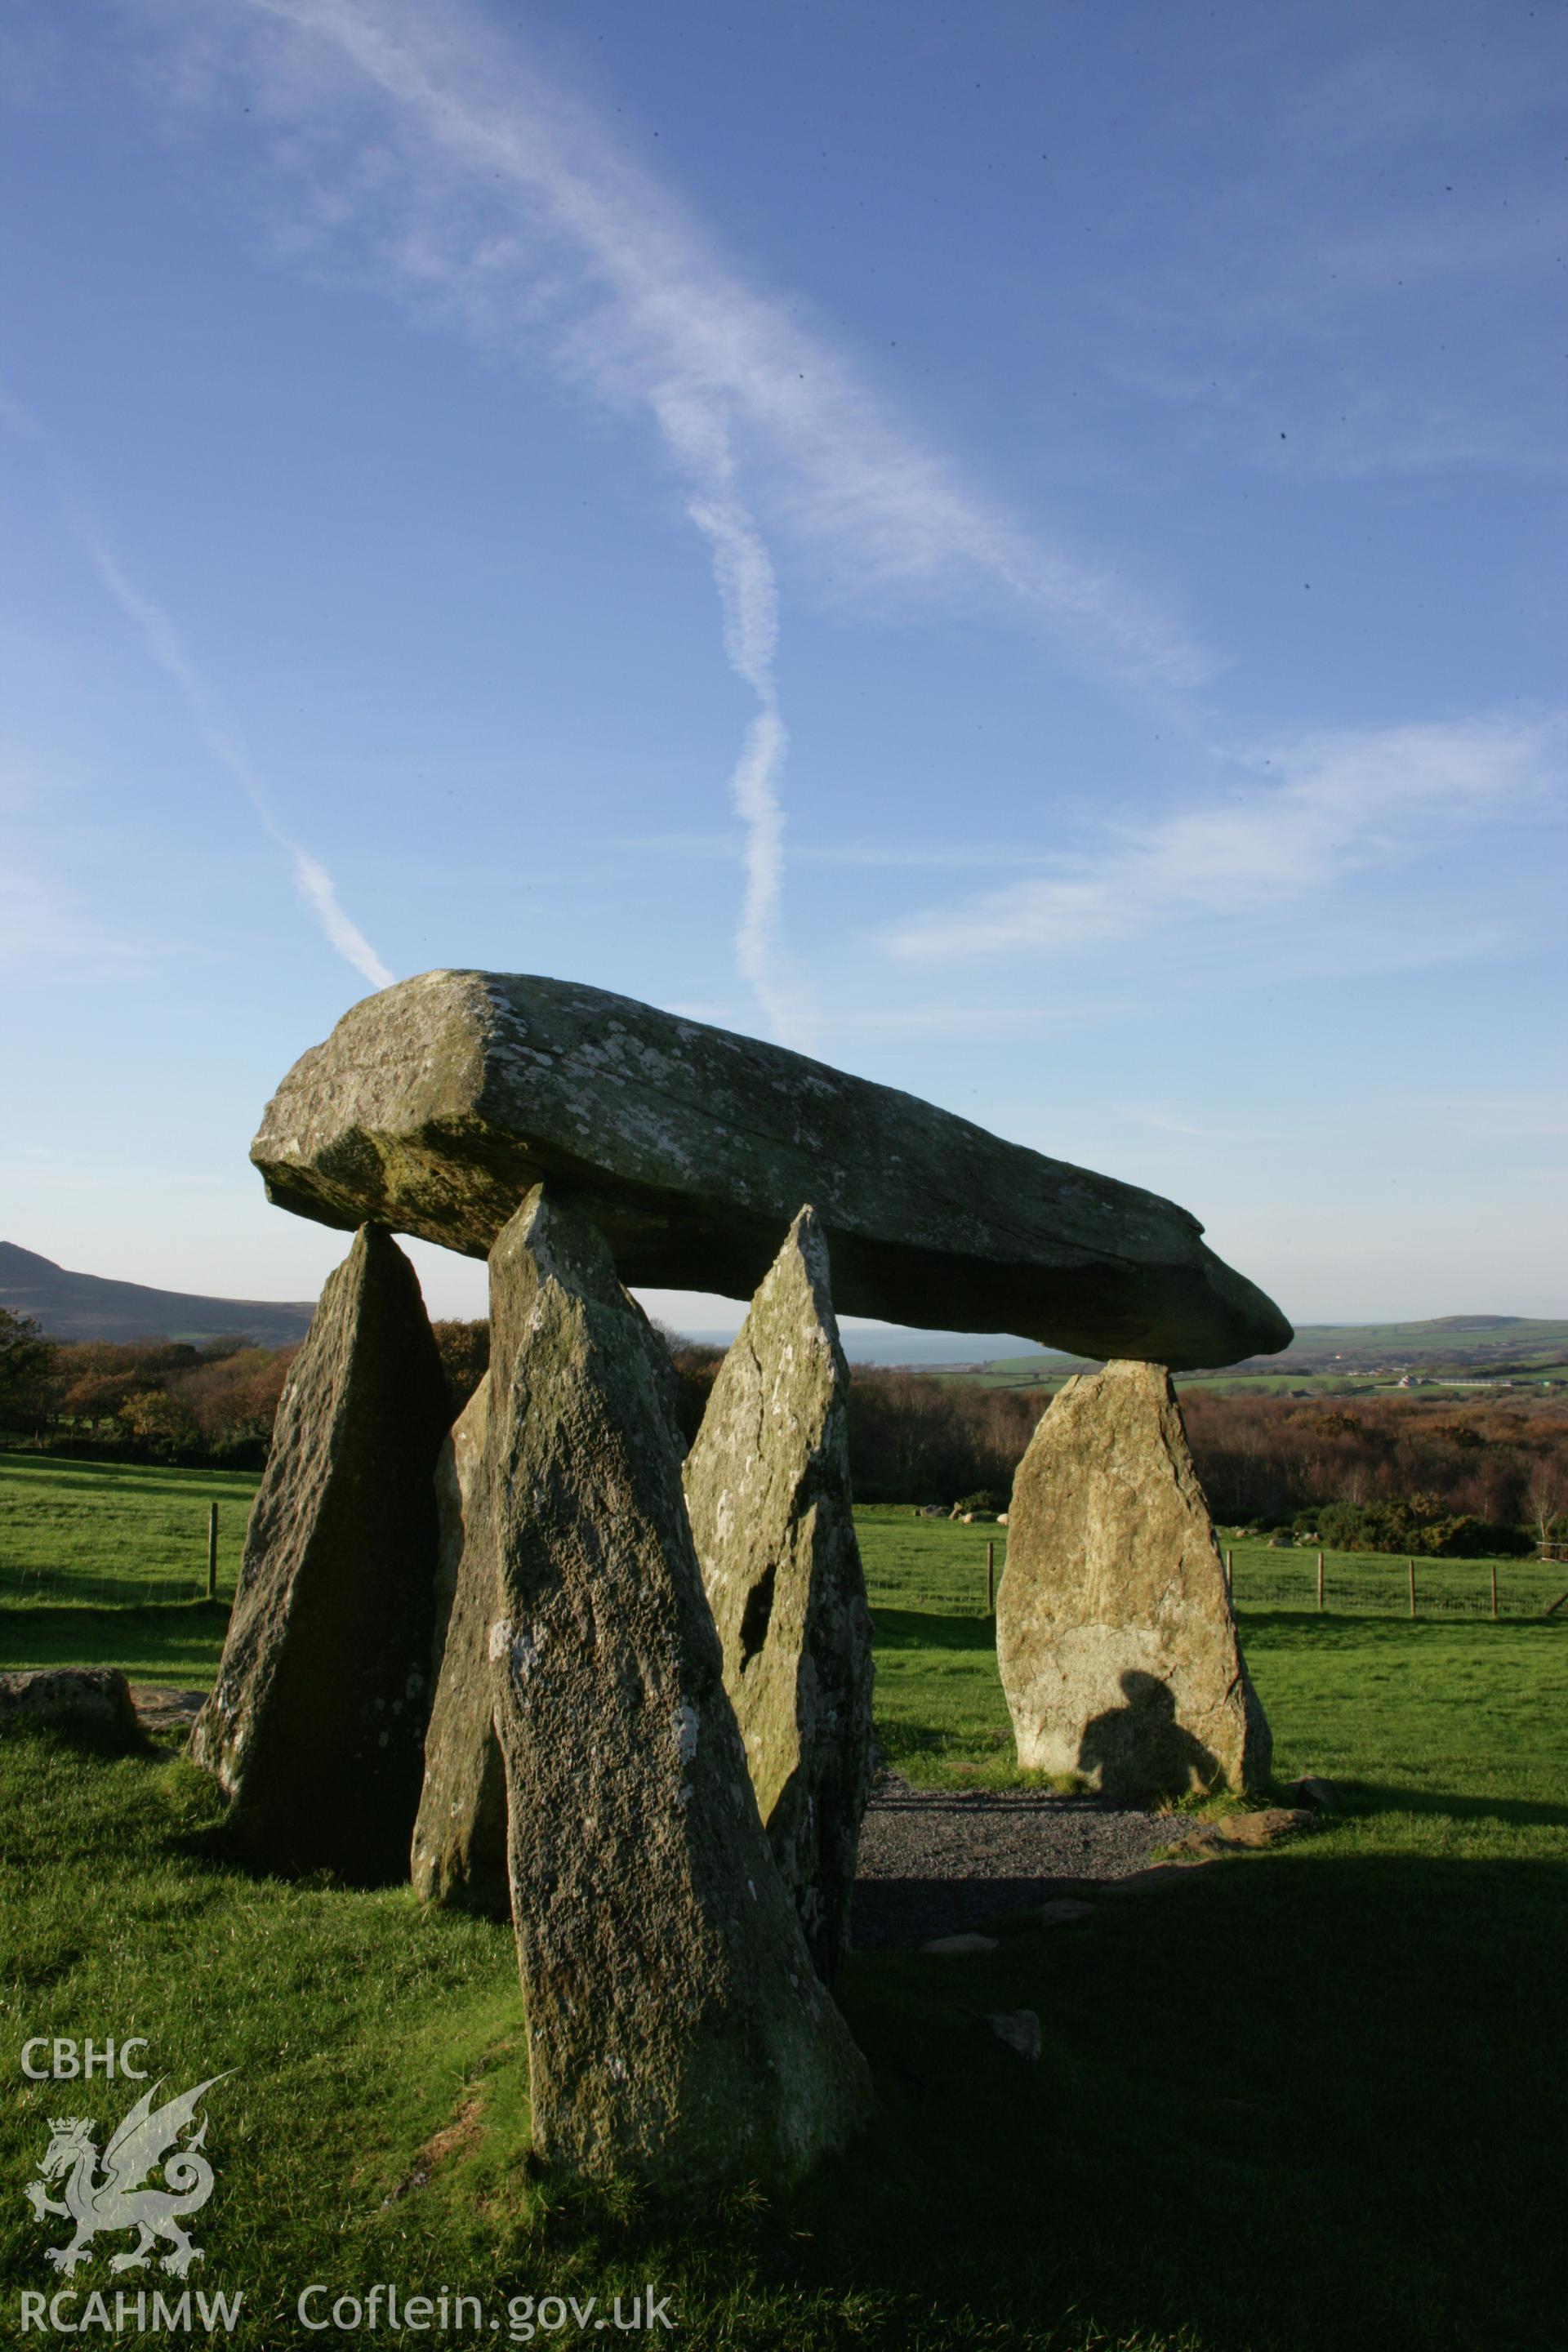 Pentre Ifan chambered tomb at sunset; view of chamber and fa?ade from south-east.